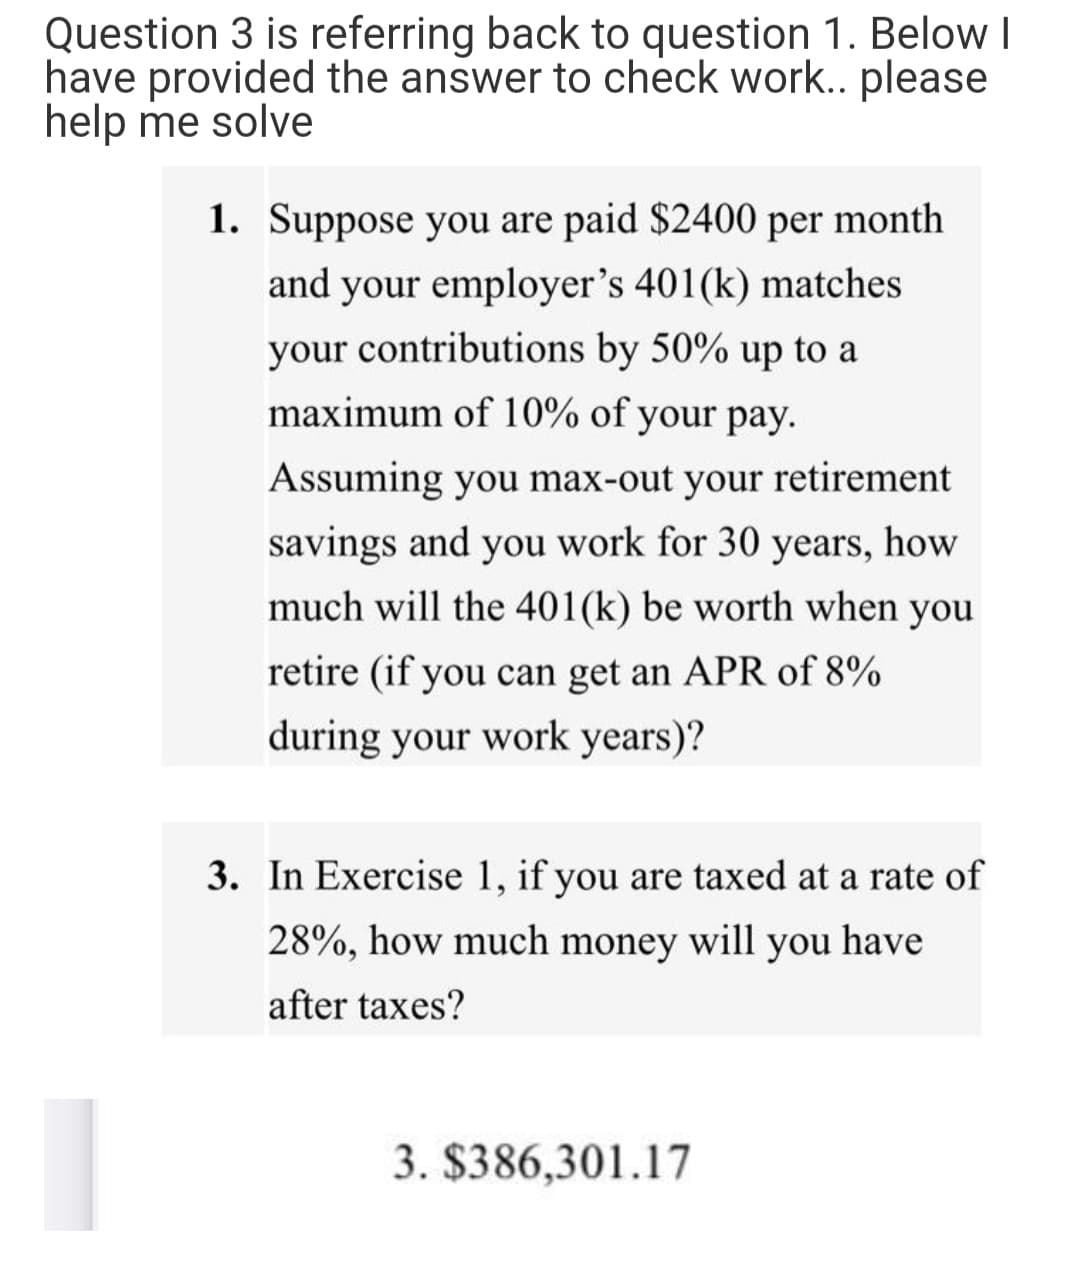 Question 3 is referring back to question 1. Below I
have provided the answer to check work.. please
help me solve
1. Suppose you are paid $2400 per month
and your employer's 401(k) matches
your contributions by 50% up to a
maximum of 10% of your pay.
Assuming you max-out your retirement
savings and you work for 30 years,
how
much will the 401(k) be worth when you
retire (if you can get an APR of 8%
during your work years)?
3. In Exercise 1, if you are taxed at a rate of
28%, how much money will you have
after taxes?
3. $386,301.17
